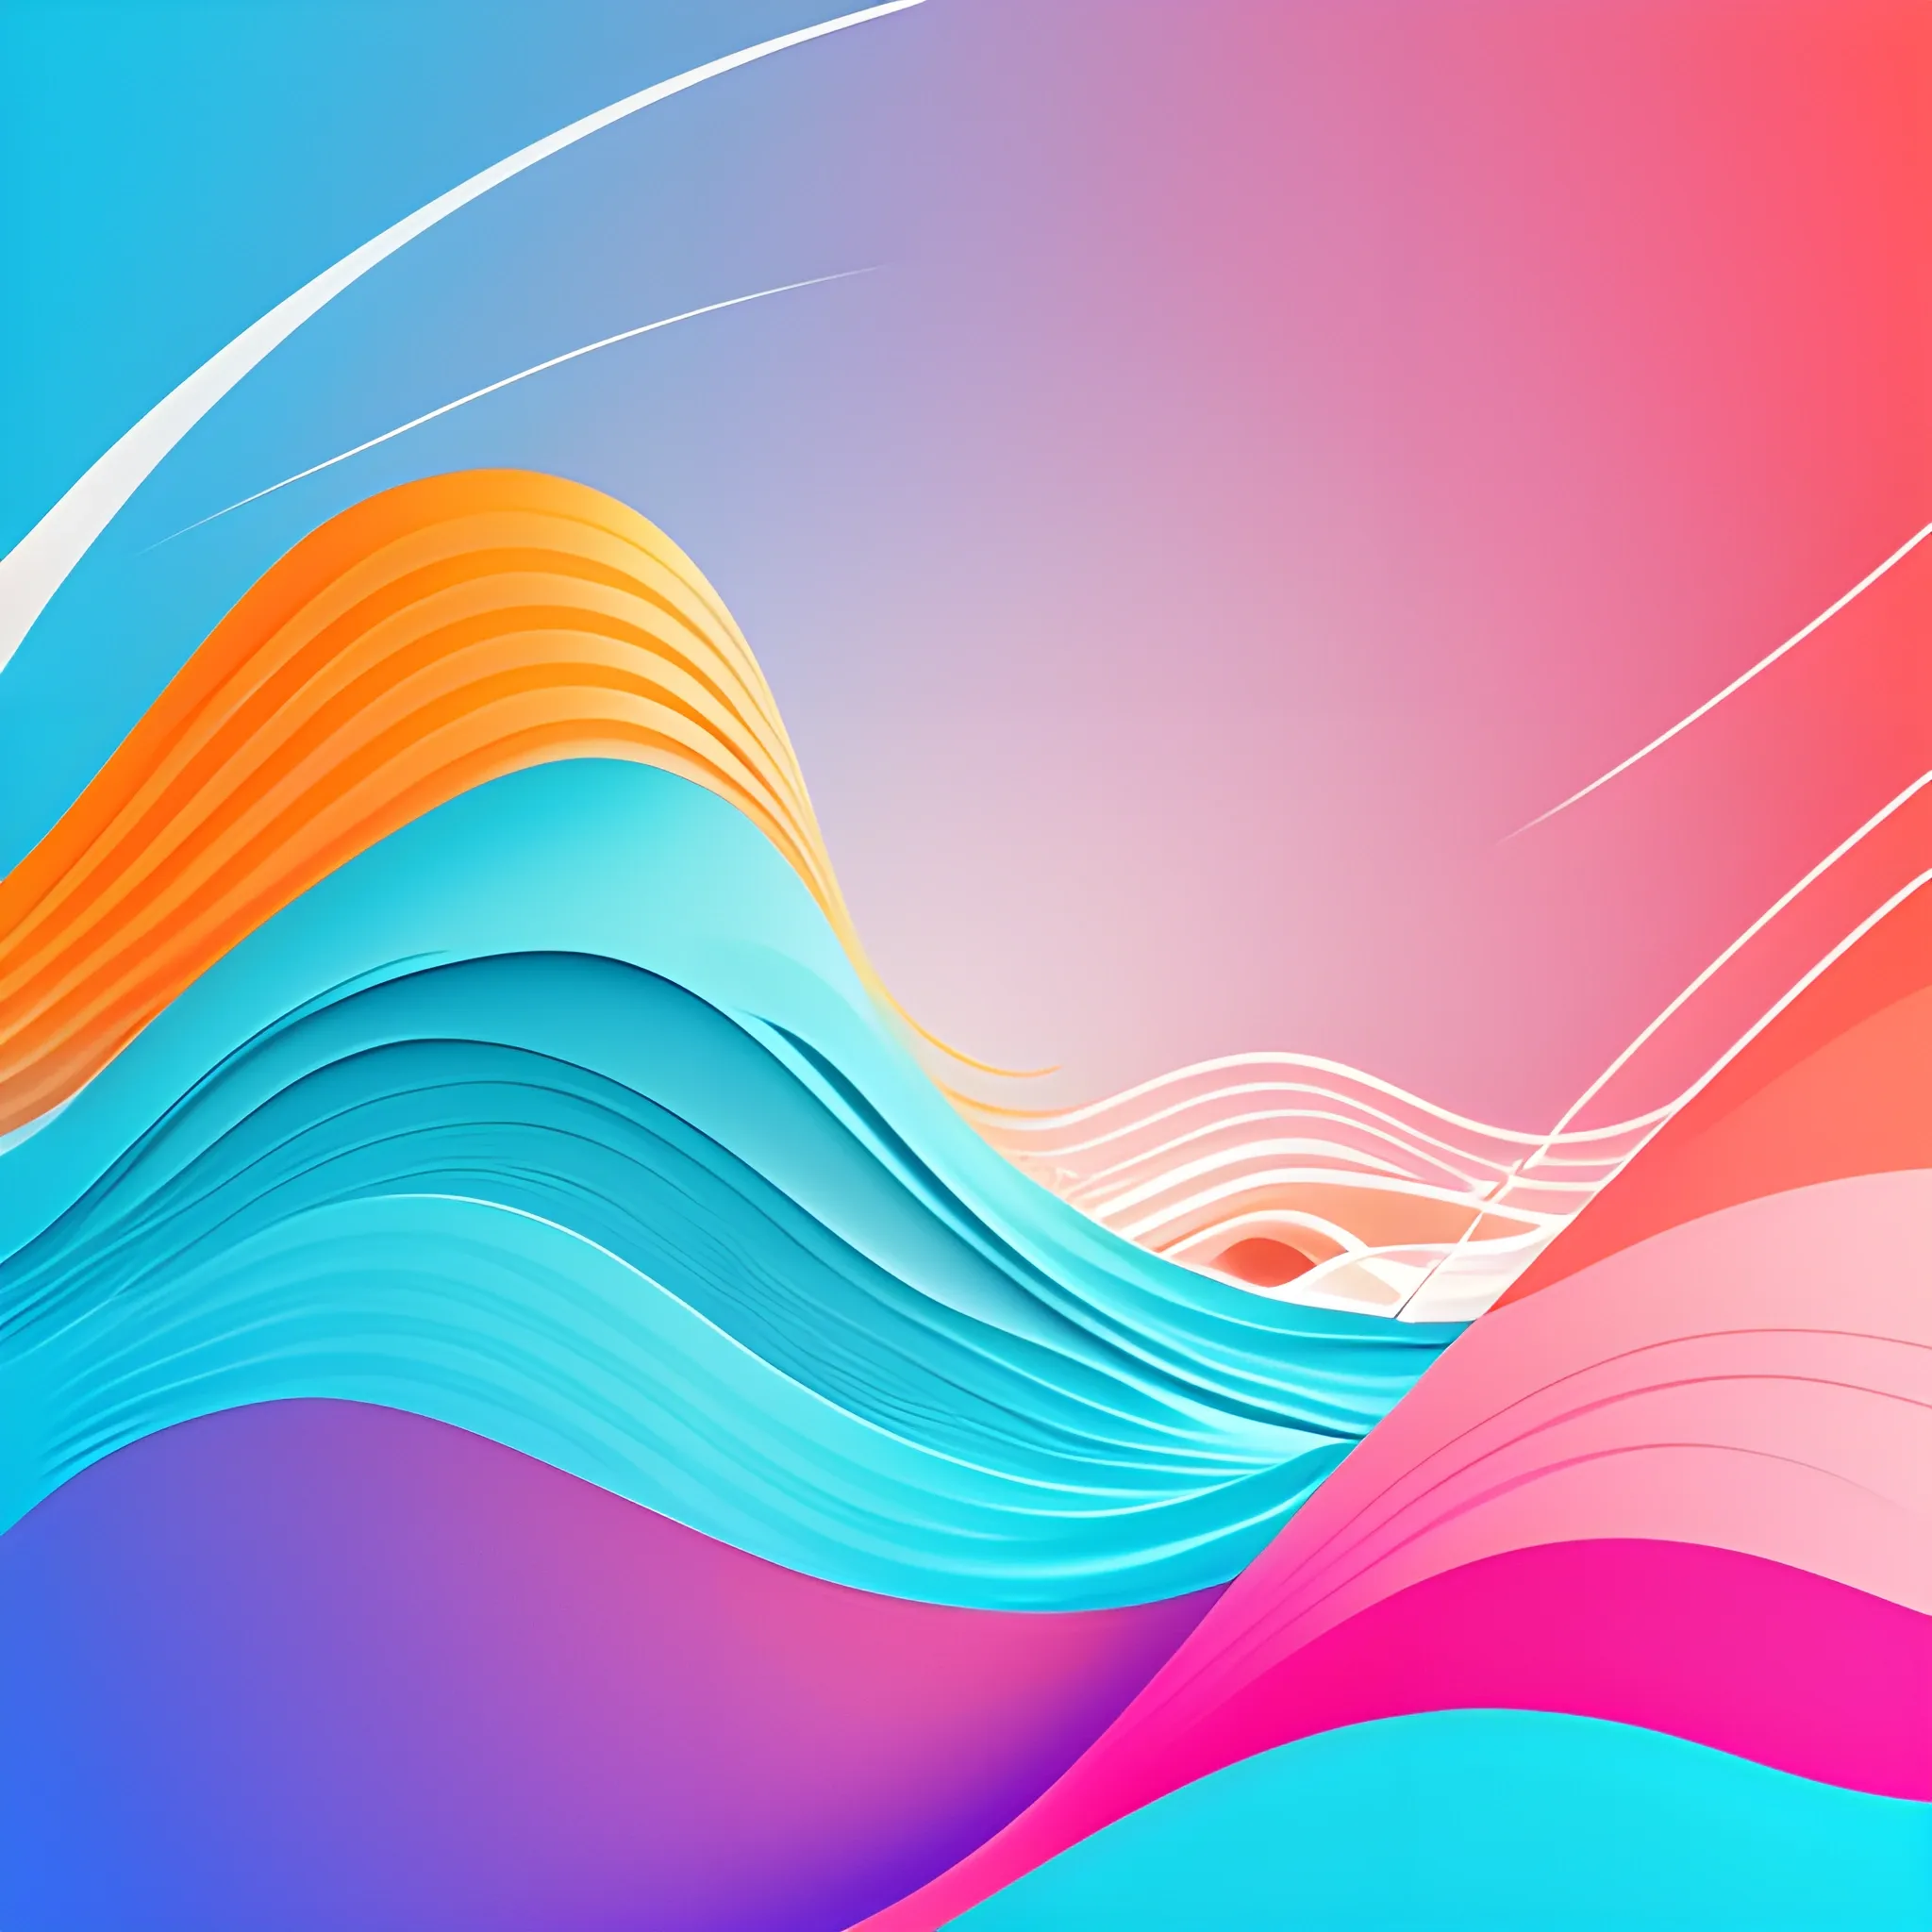 abstract, wave, in the style of windows 11, bloom wallpaper, graphic design, 2d, expert graphic design, professional, light colours, light mode, best wallpaper, minimal design, few details, high resolution, 